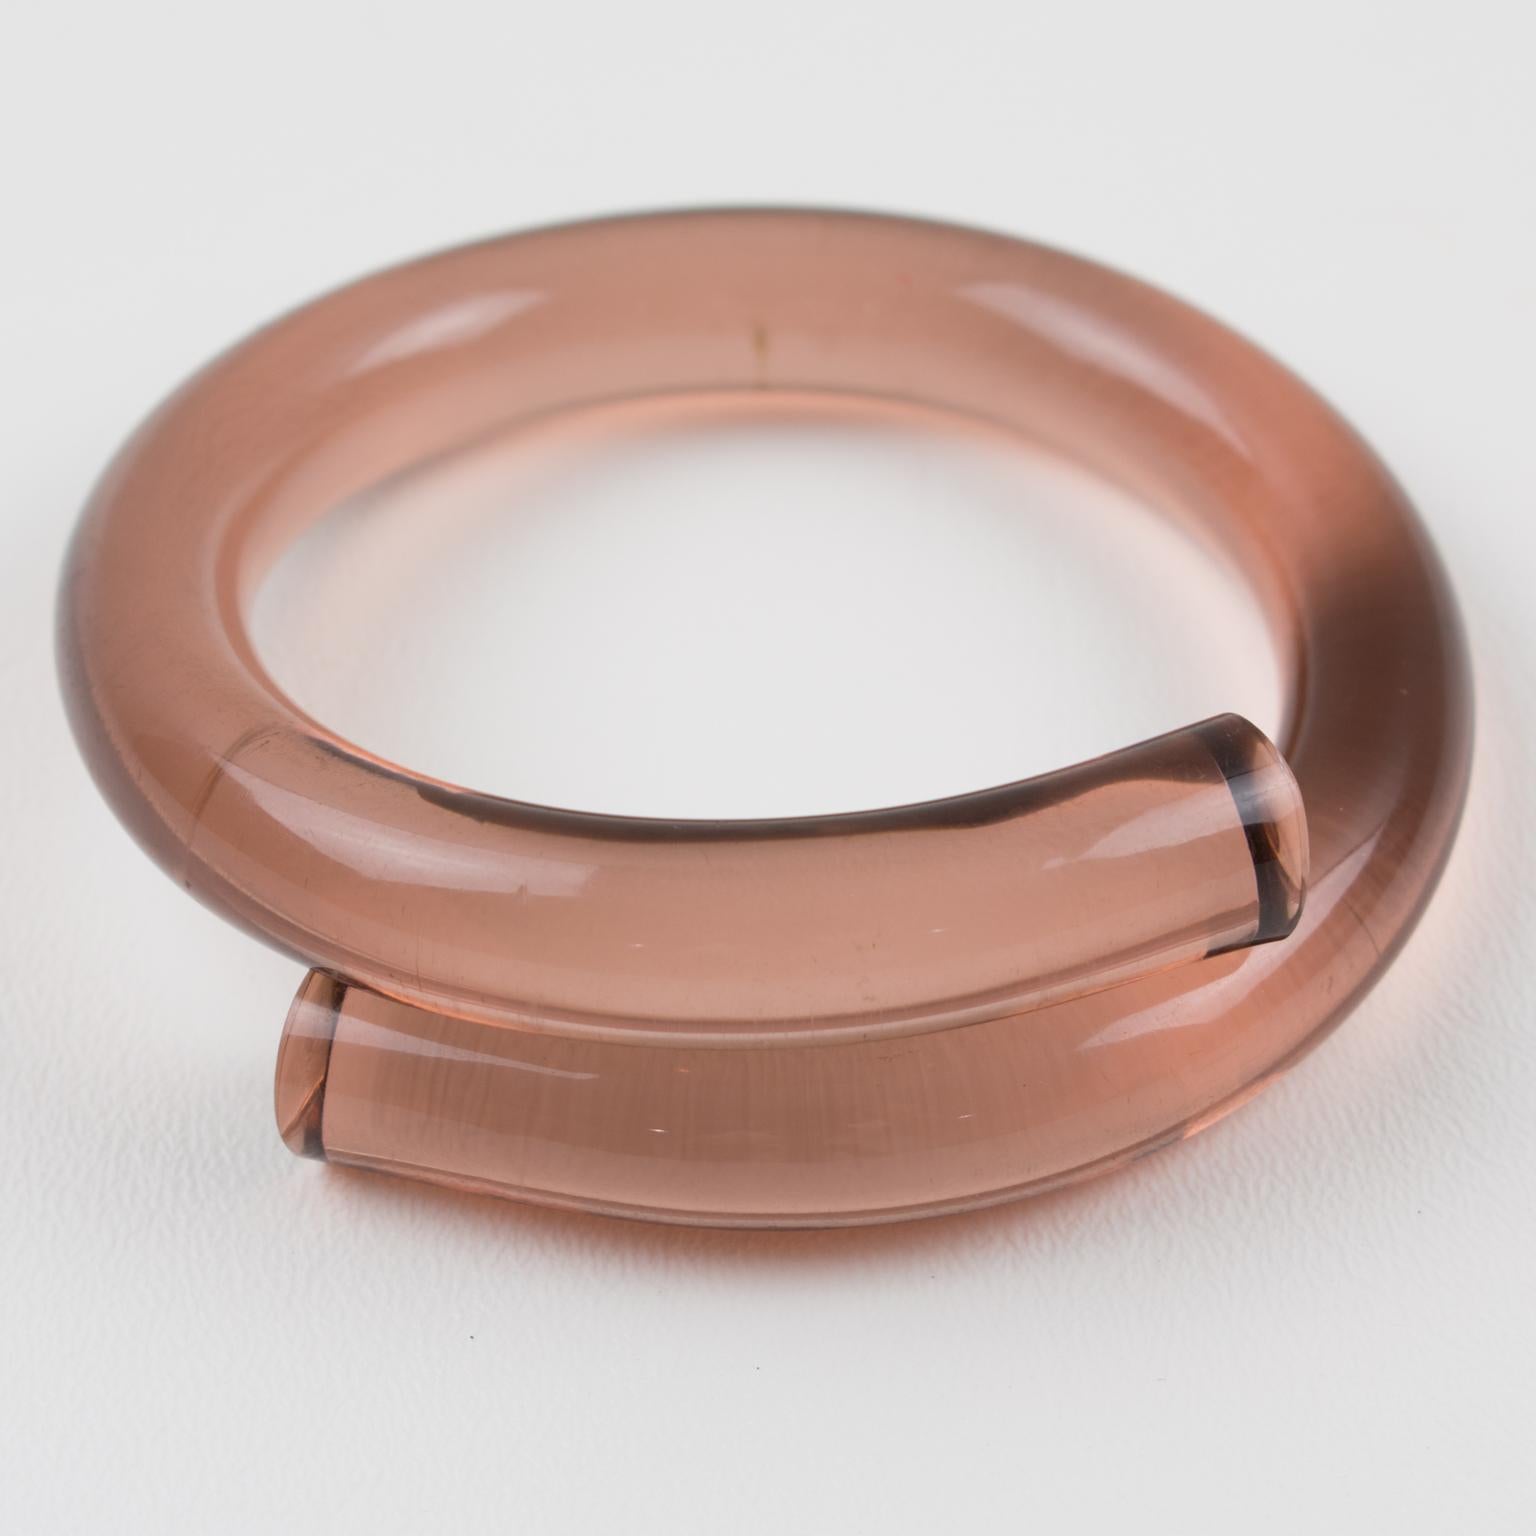 This lovely Italian artisan studio Lucite bracelet bangle boasts a transparent copper pink color with a coiled-shaped design. There is no visible maker's mark.
Measurements: inside across is 2.38 in diameter (6 cm) - outside across is 3.25 in